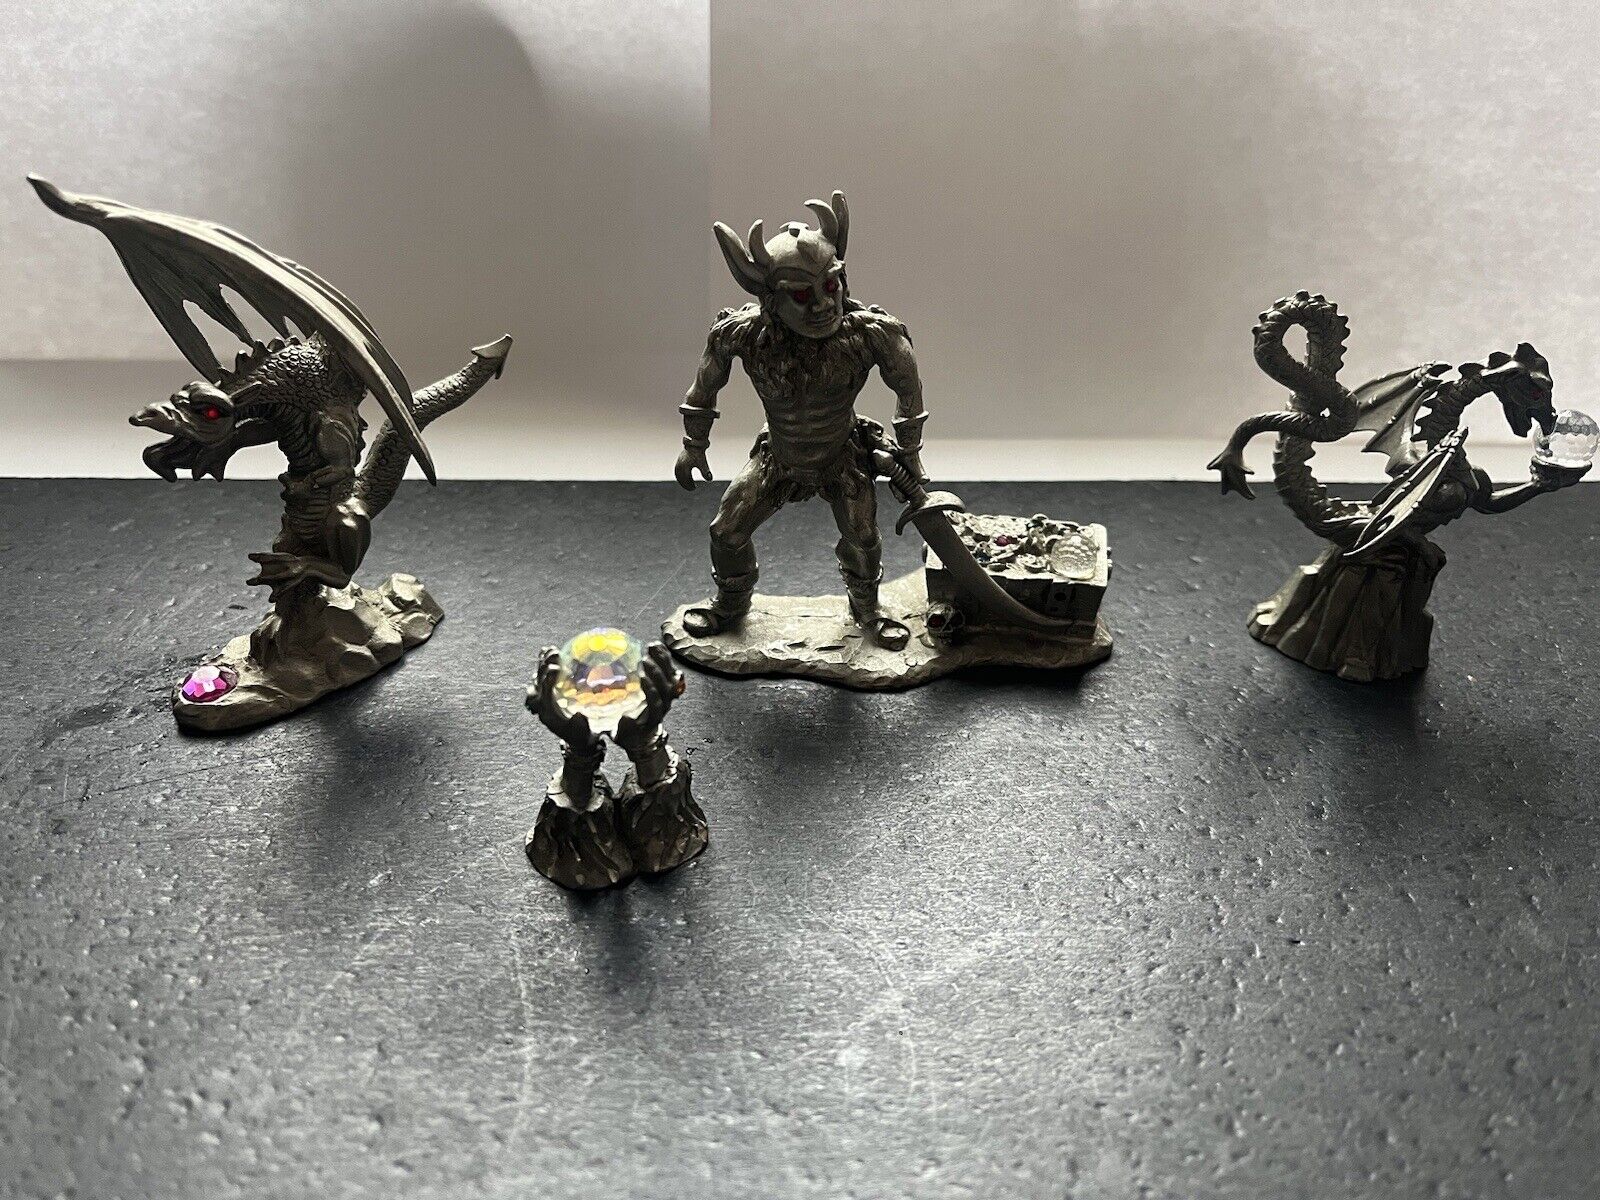 Lot of 4(2)Vintage Pewter Dragons+ 1 Scary Pirate Hands, 1 Holden Crystal 4 lot